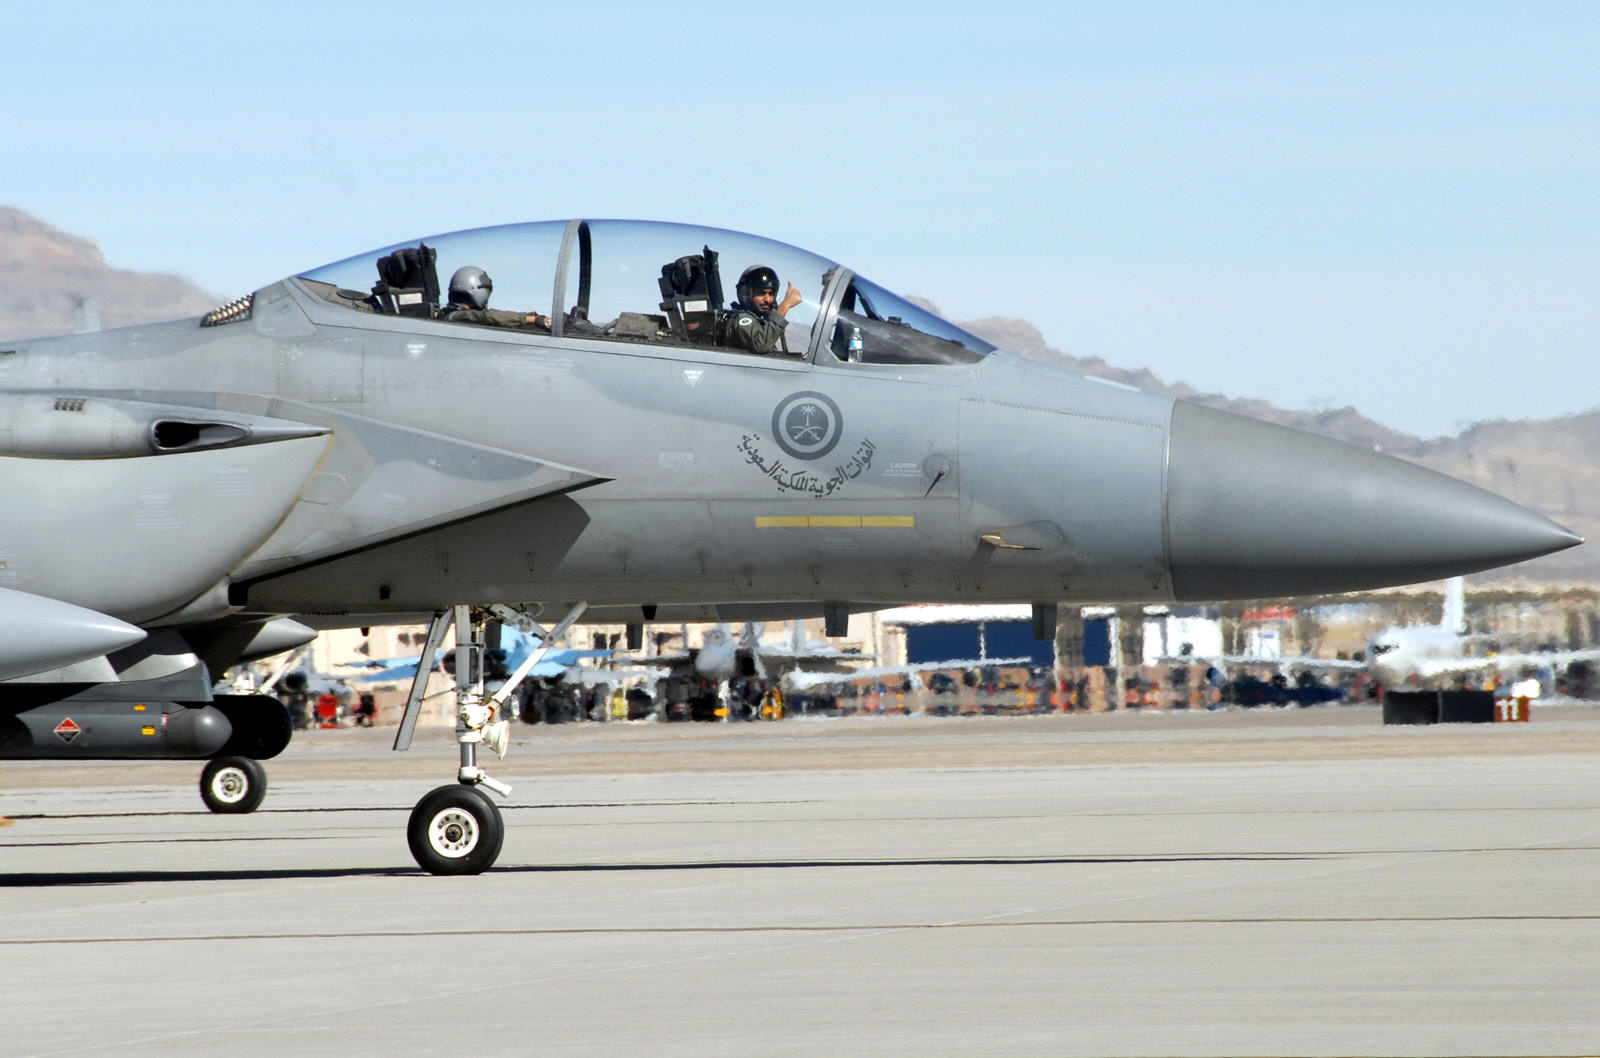 NELLIS AIR FORCE BASE, Nev. – A Royal Saudi air force pilot gives the thumbs-up as he taxis his F-15S to the runway for a Red Flag mission here Feb. 12. Red Flag is a multi-national exercise providing pilots with a realistic environment to practice combat scenarios. The experience gained during Red Flag is vital to the survival of pilots in combat. (U.S. Air Force photo by Chief Master Sgt. Gary Emery)